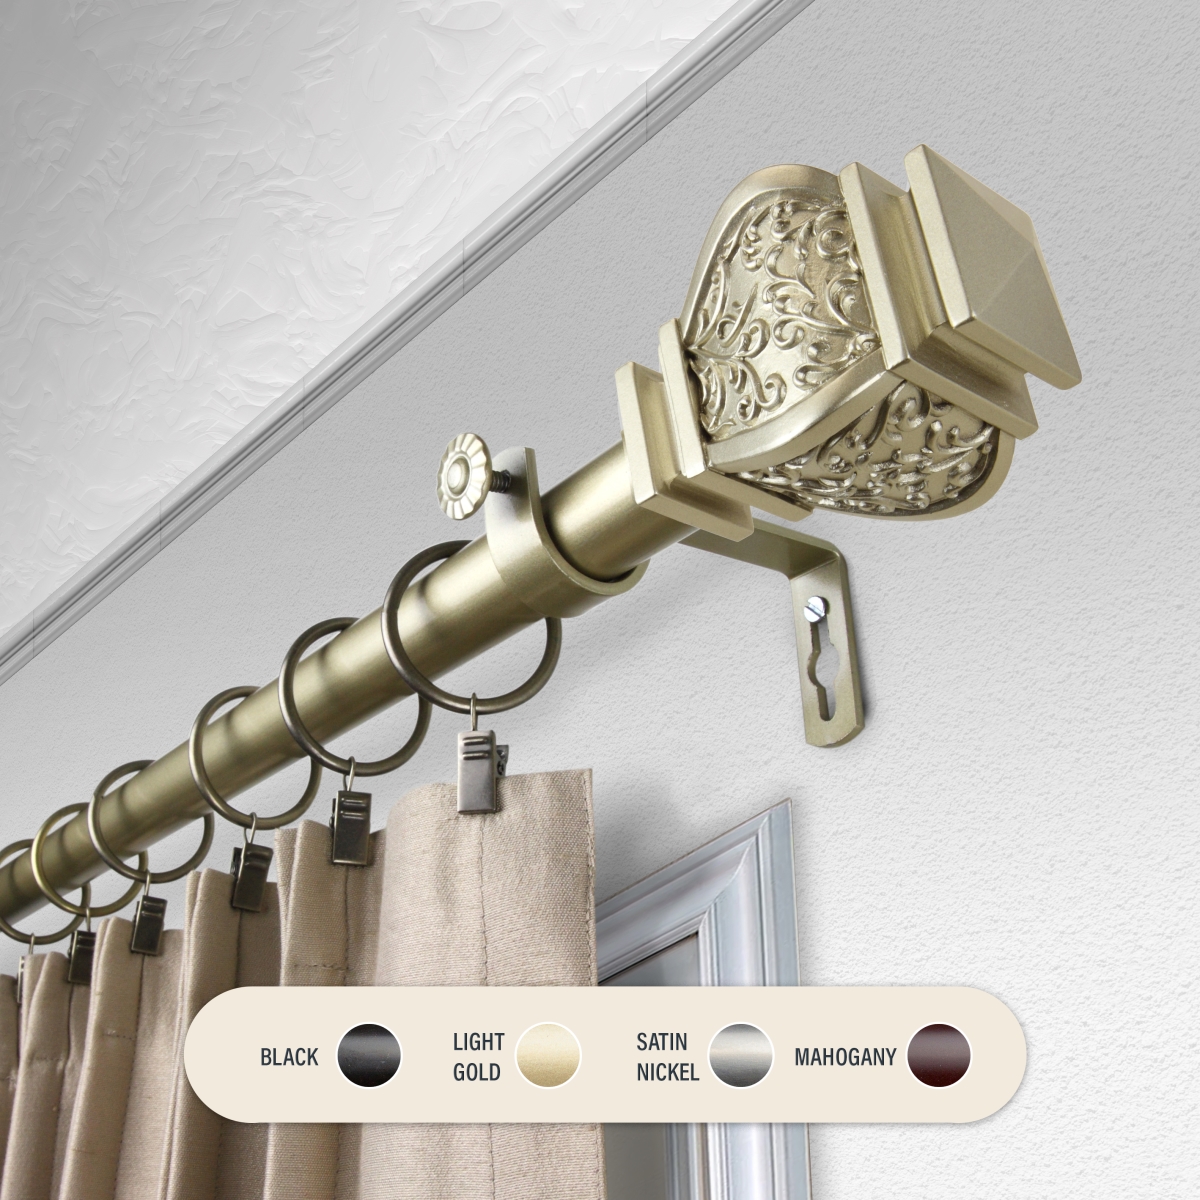 Picture of Central Design 100-14-993 1 in. Harrison Curtain Rod with 120 to 170 in. Extension, Light Gold